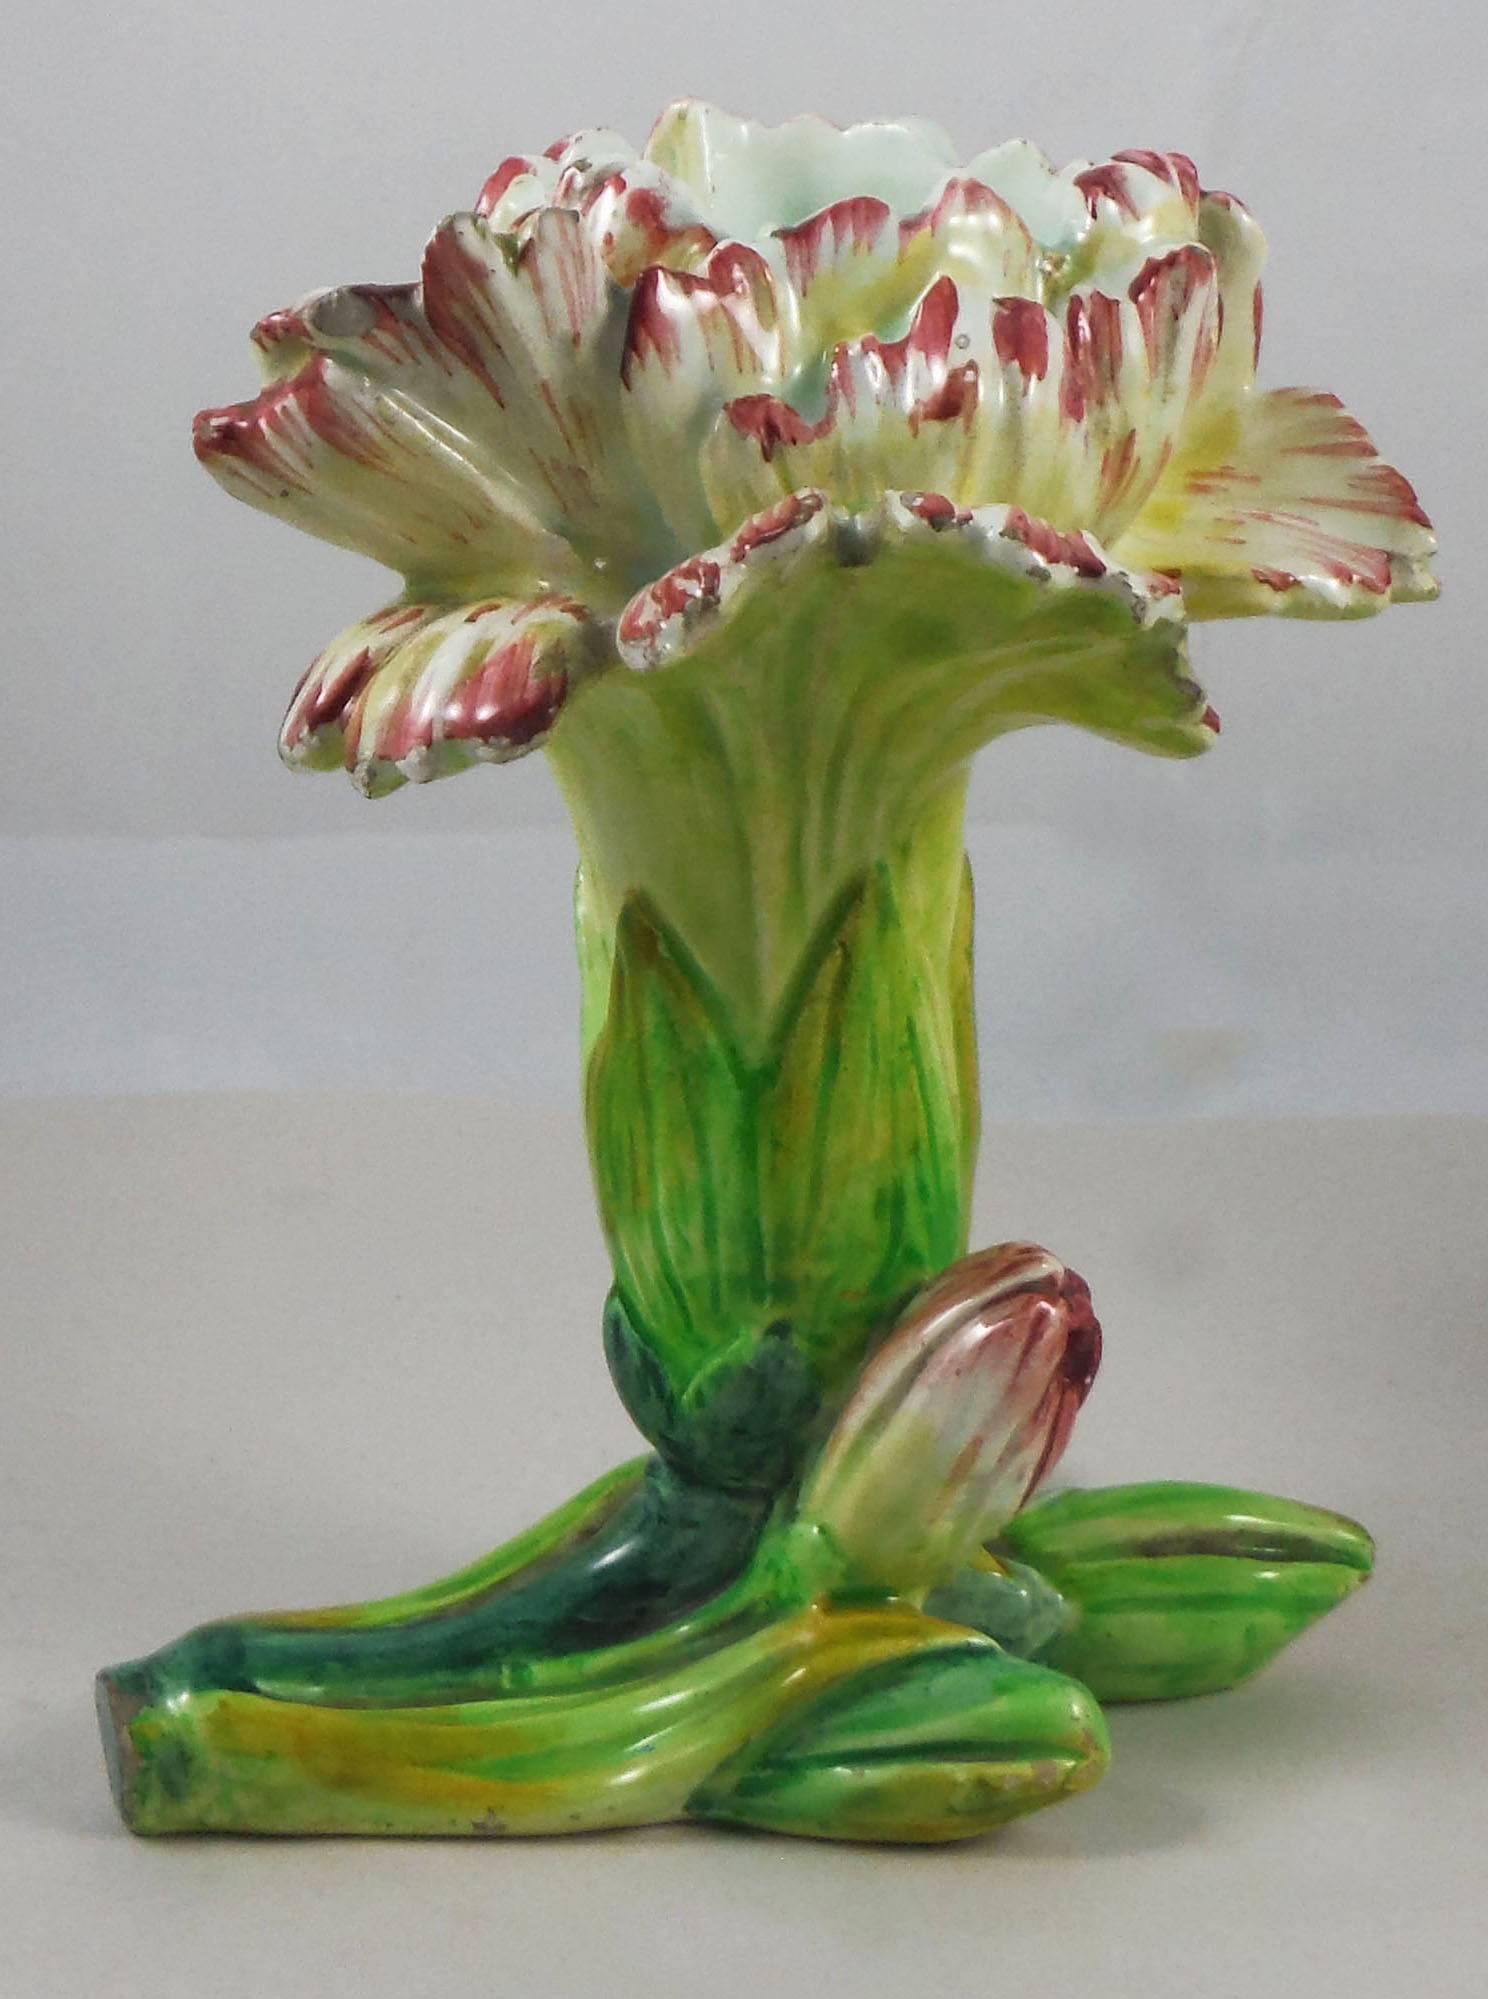 Rare Majolica carnation vase signed Jerome Massier, circa 1900.
The Massier family are known for the quality of their unique enamels and paintings. They produced an incredible whole range of flowers like iris, roses, daisies, wild roses, orchids,